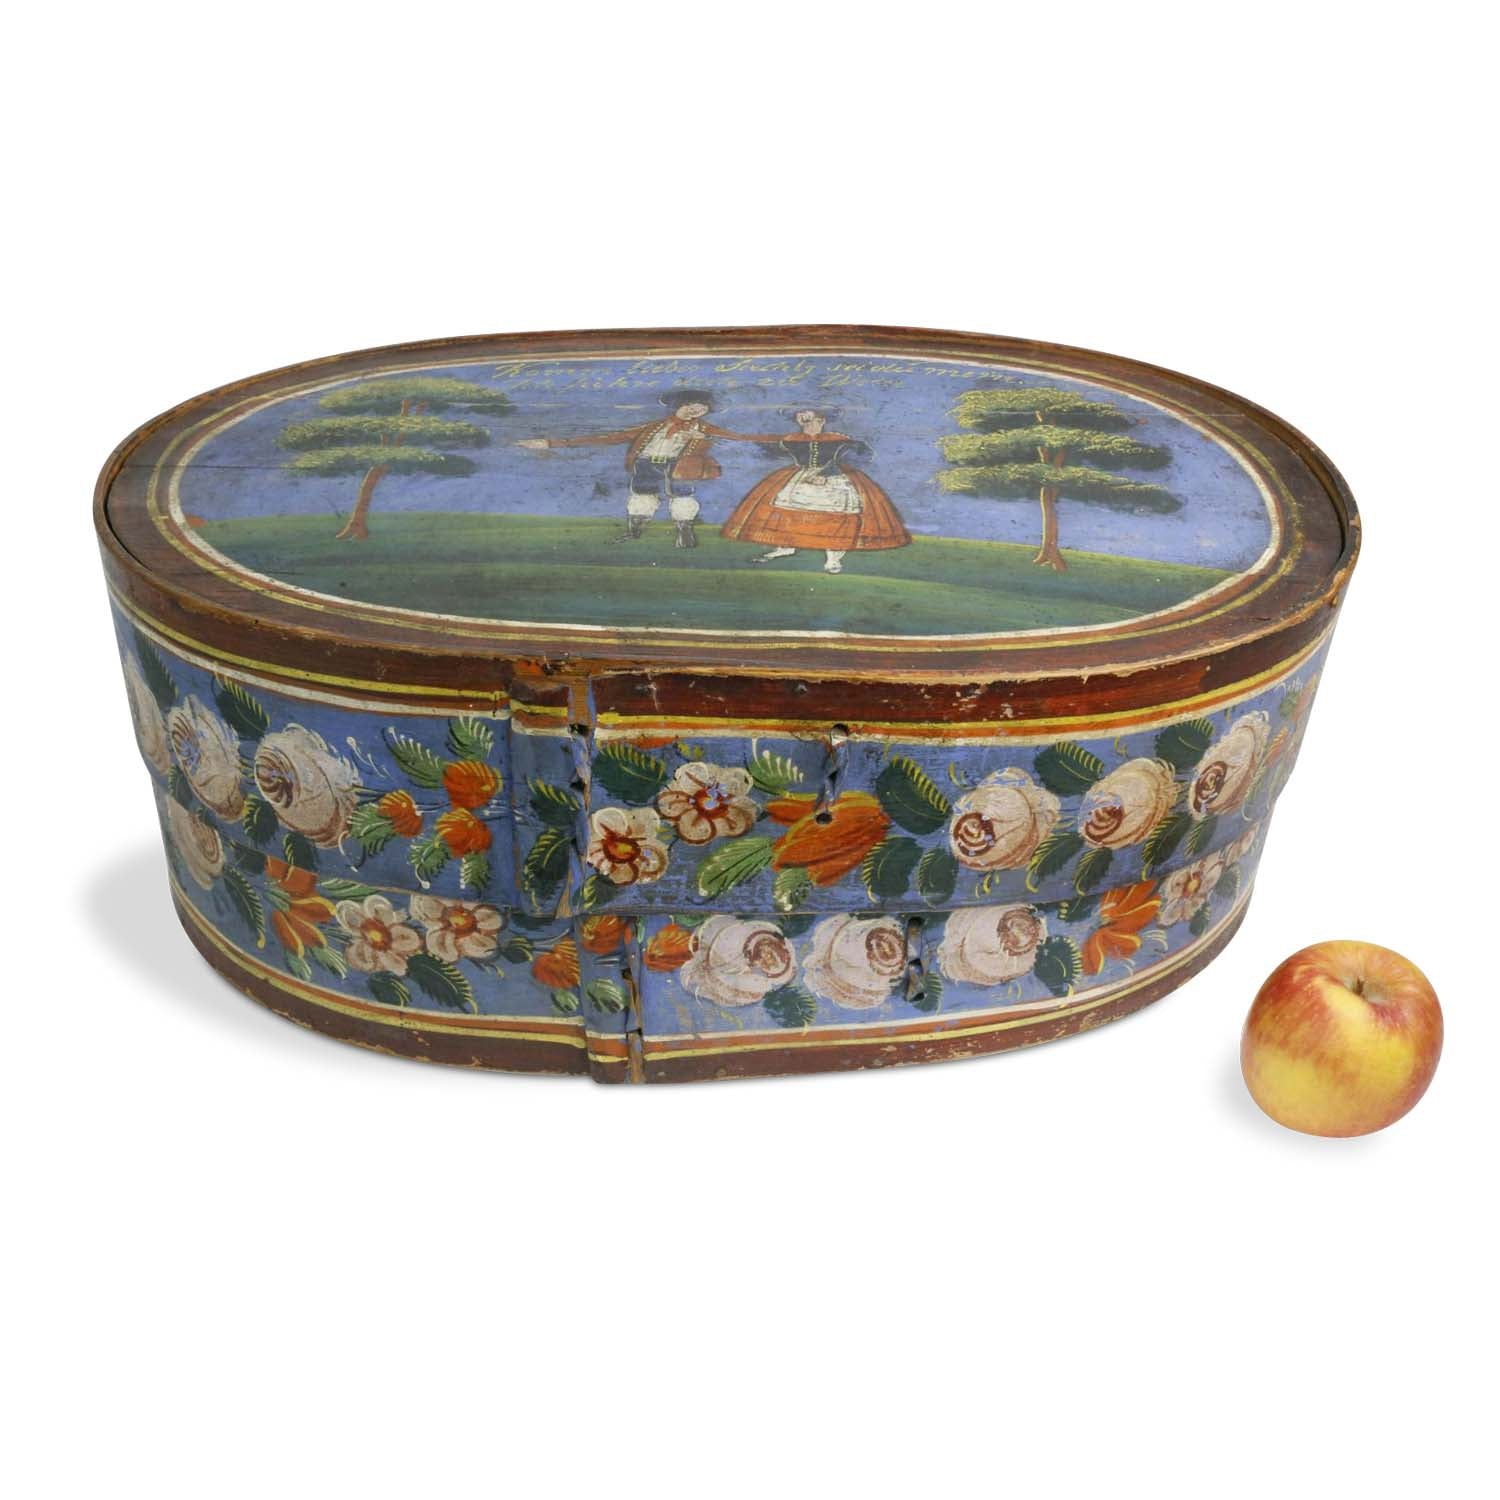 Large Scandinavian Decorated Oval Band Box, 19th Century